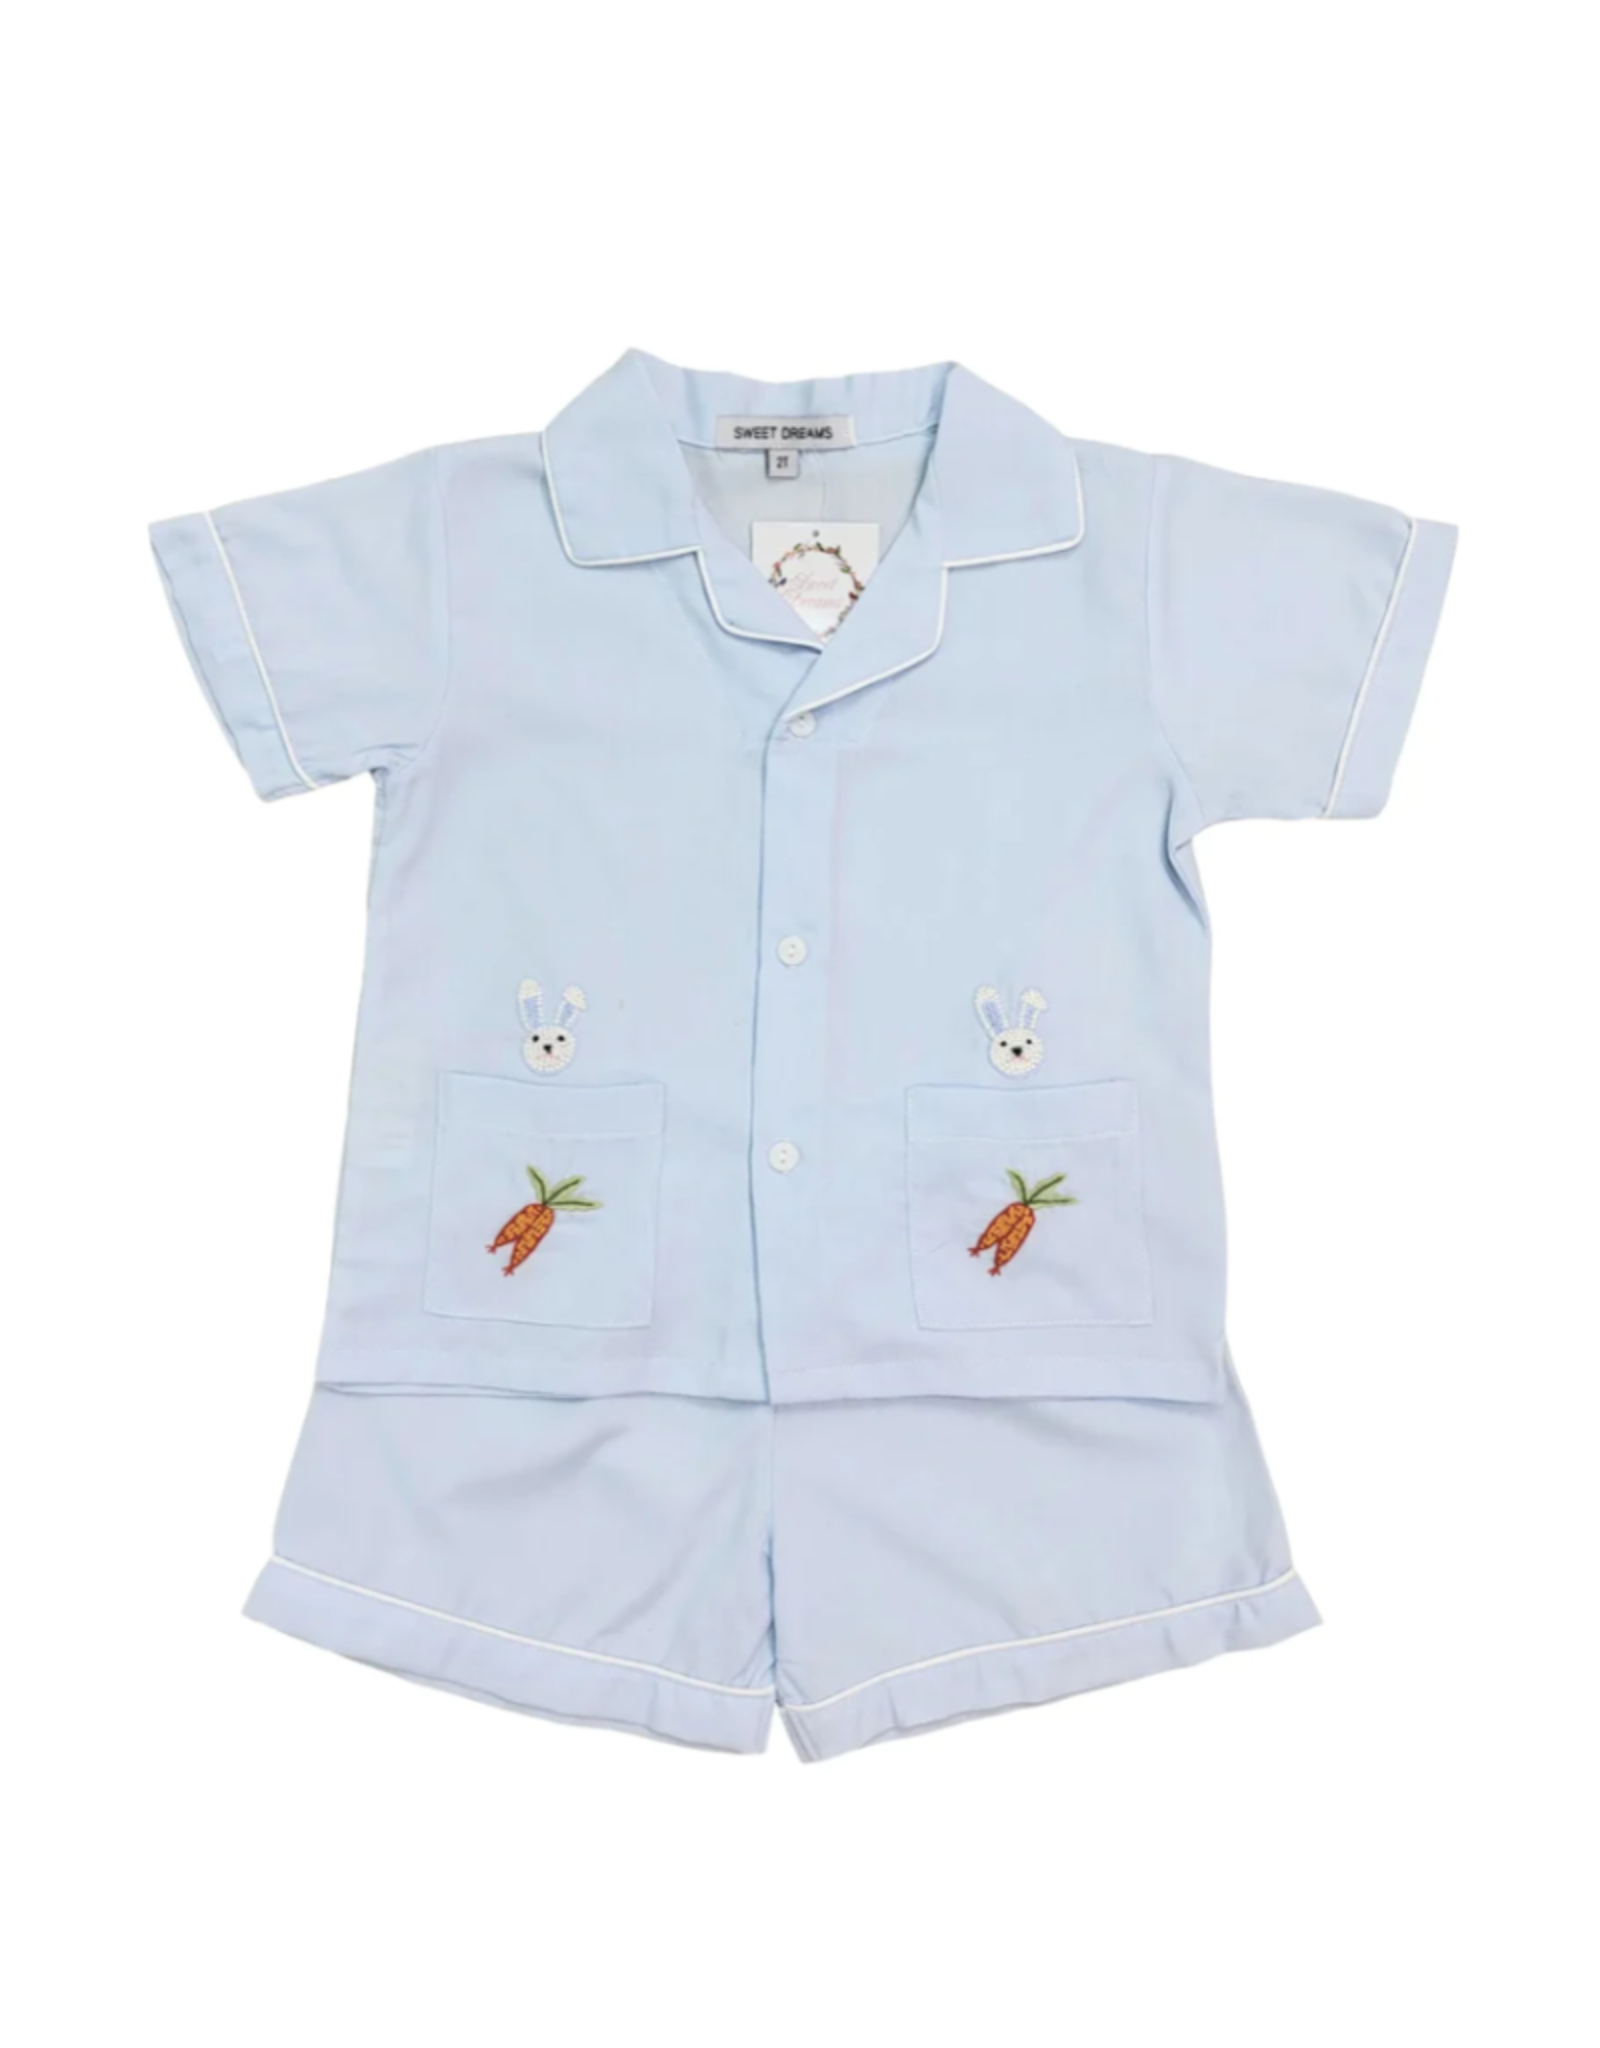 Sweet Dreams Blue PJ's W/ Embroidered Bunny & Carrot